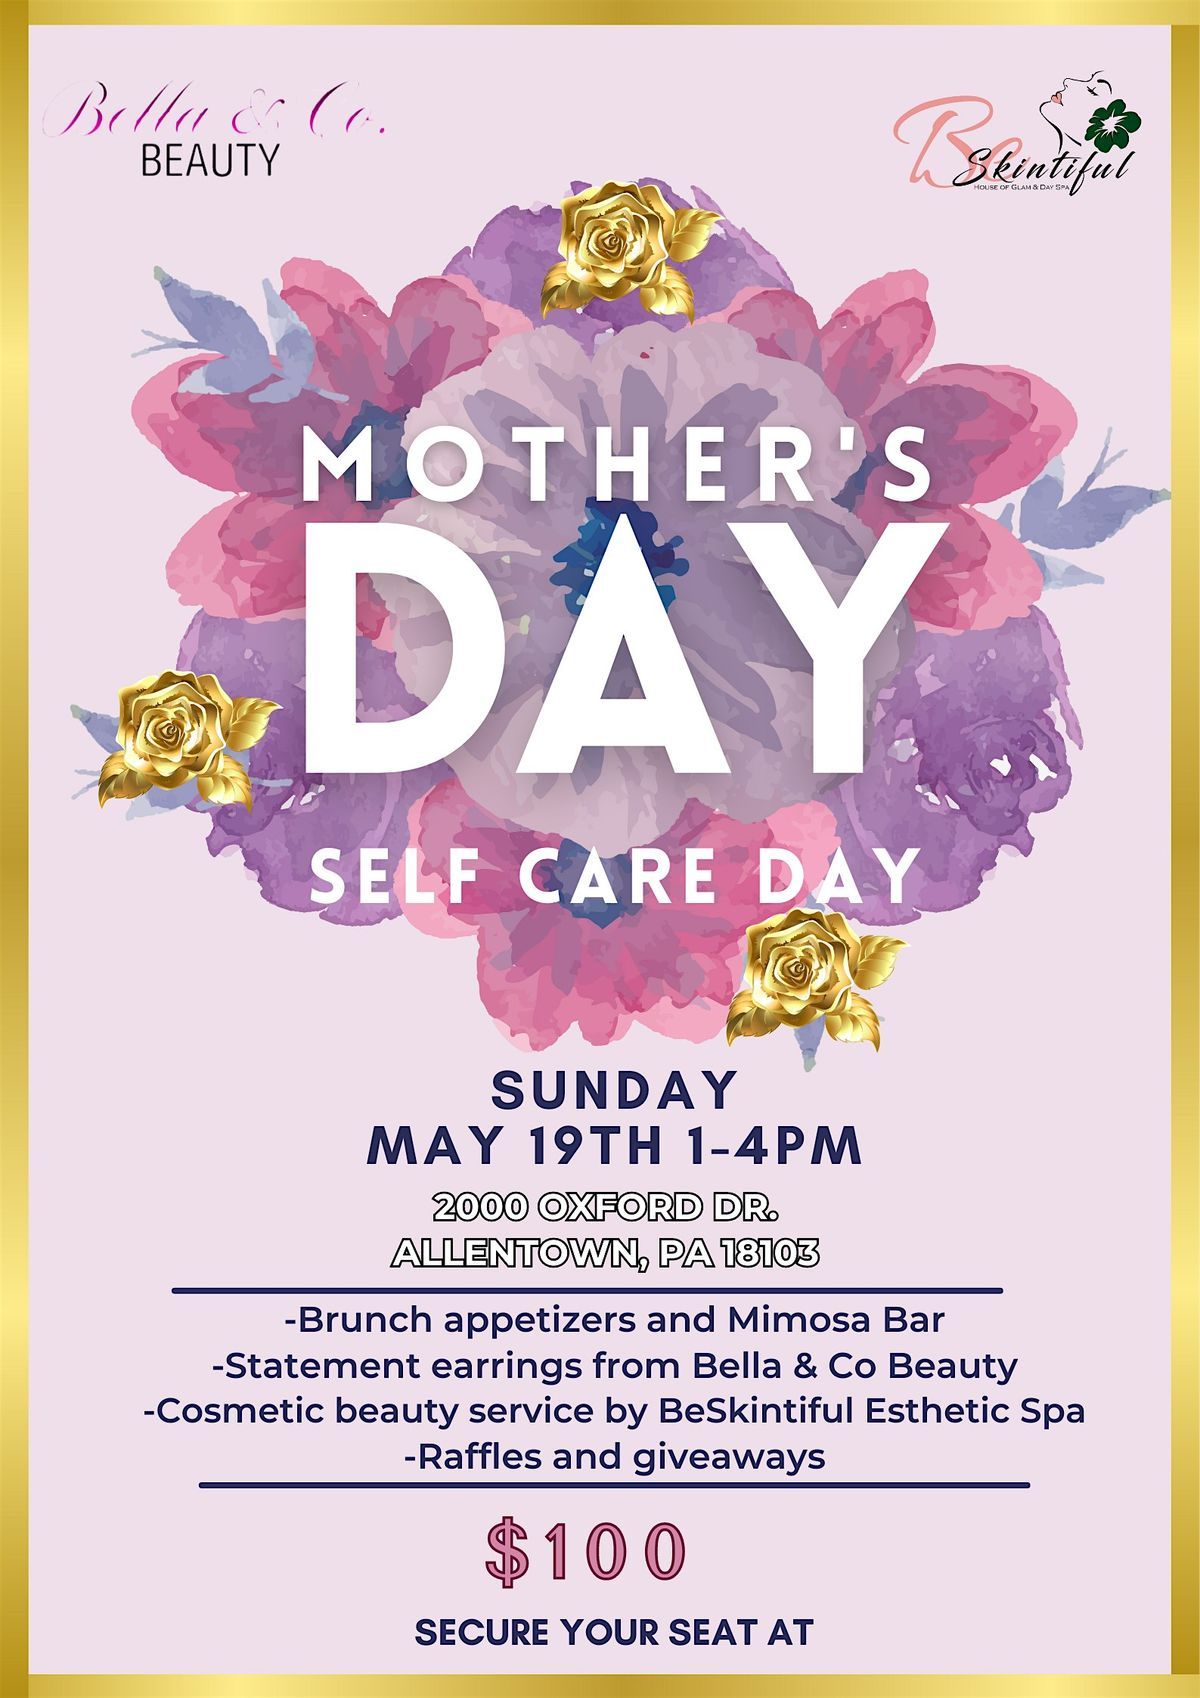 Mother's Day Self-Care Day